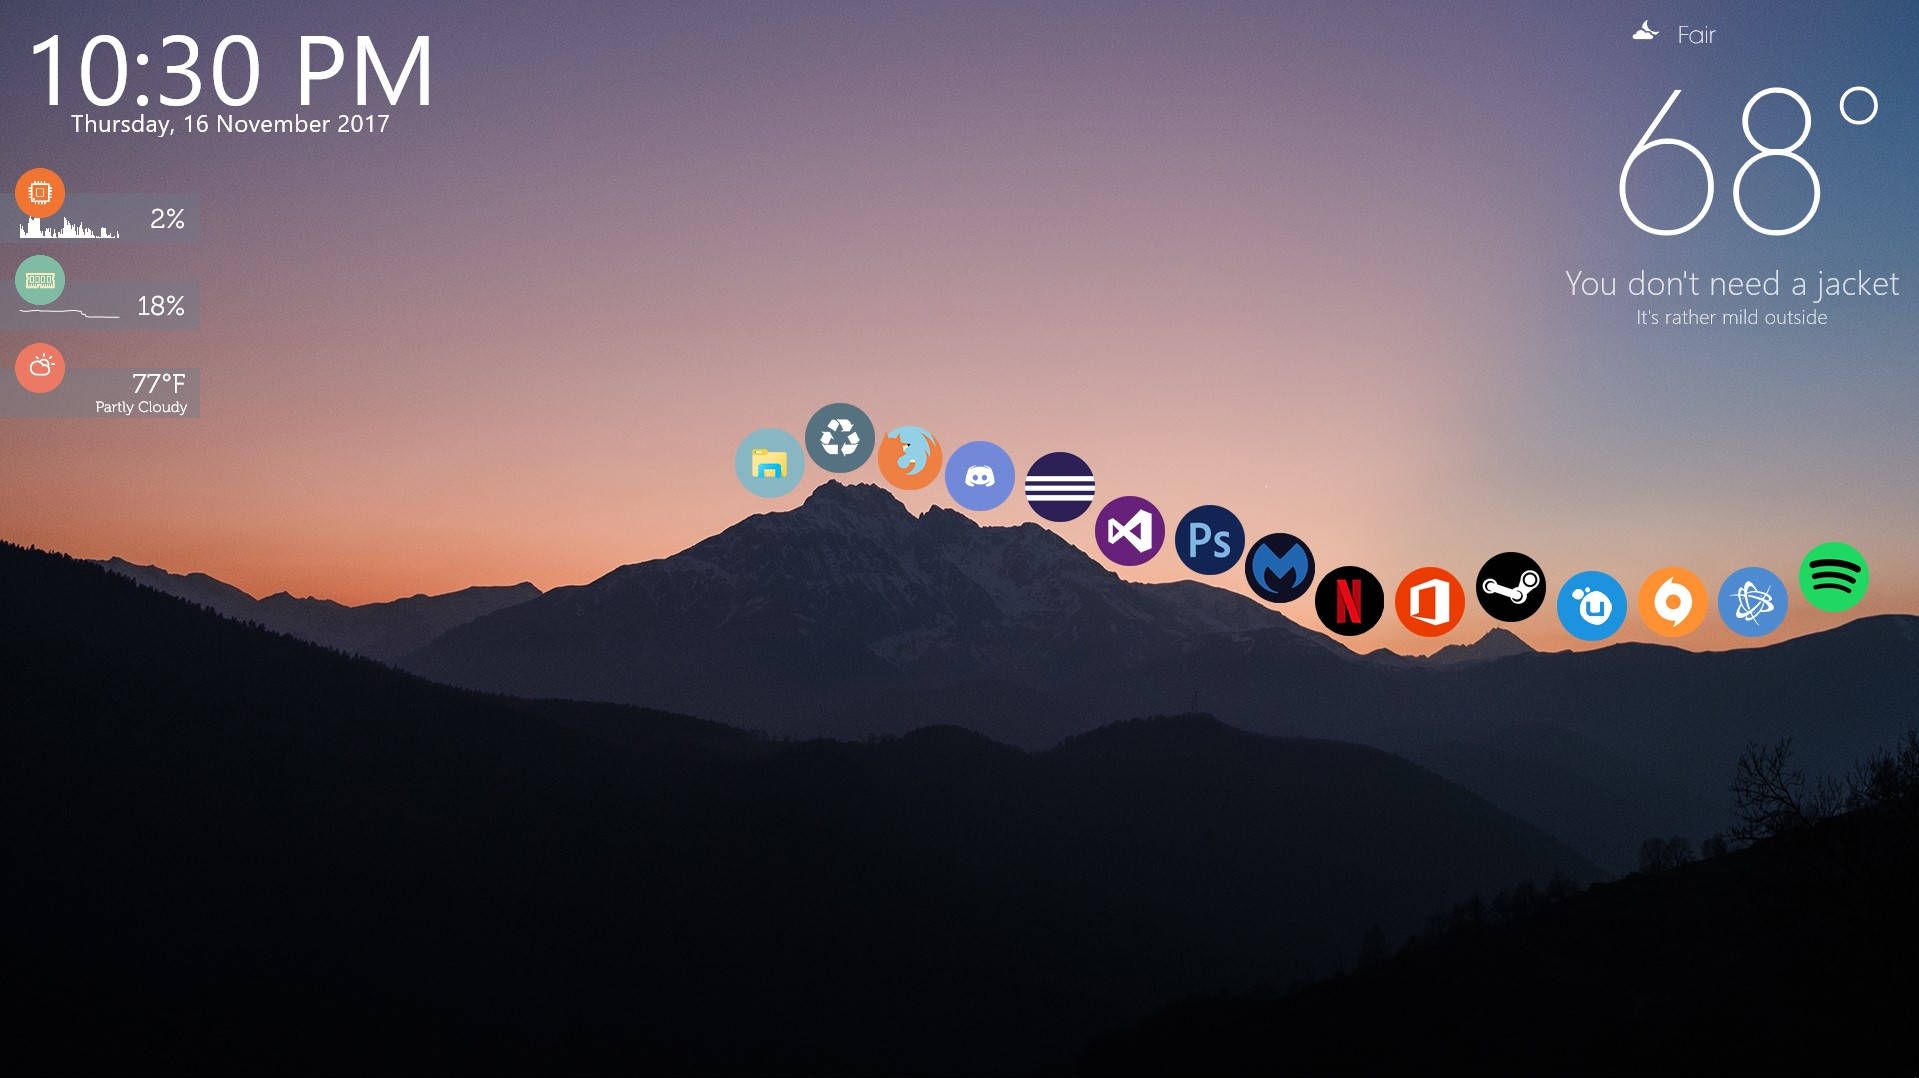 10 Best Live Wallpapers for your Windows 10 PC